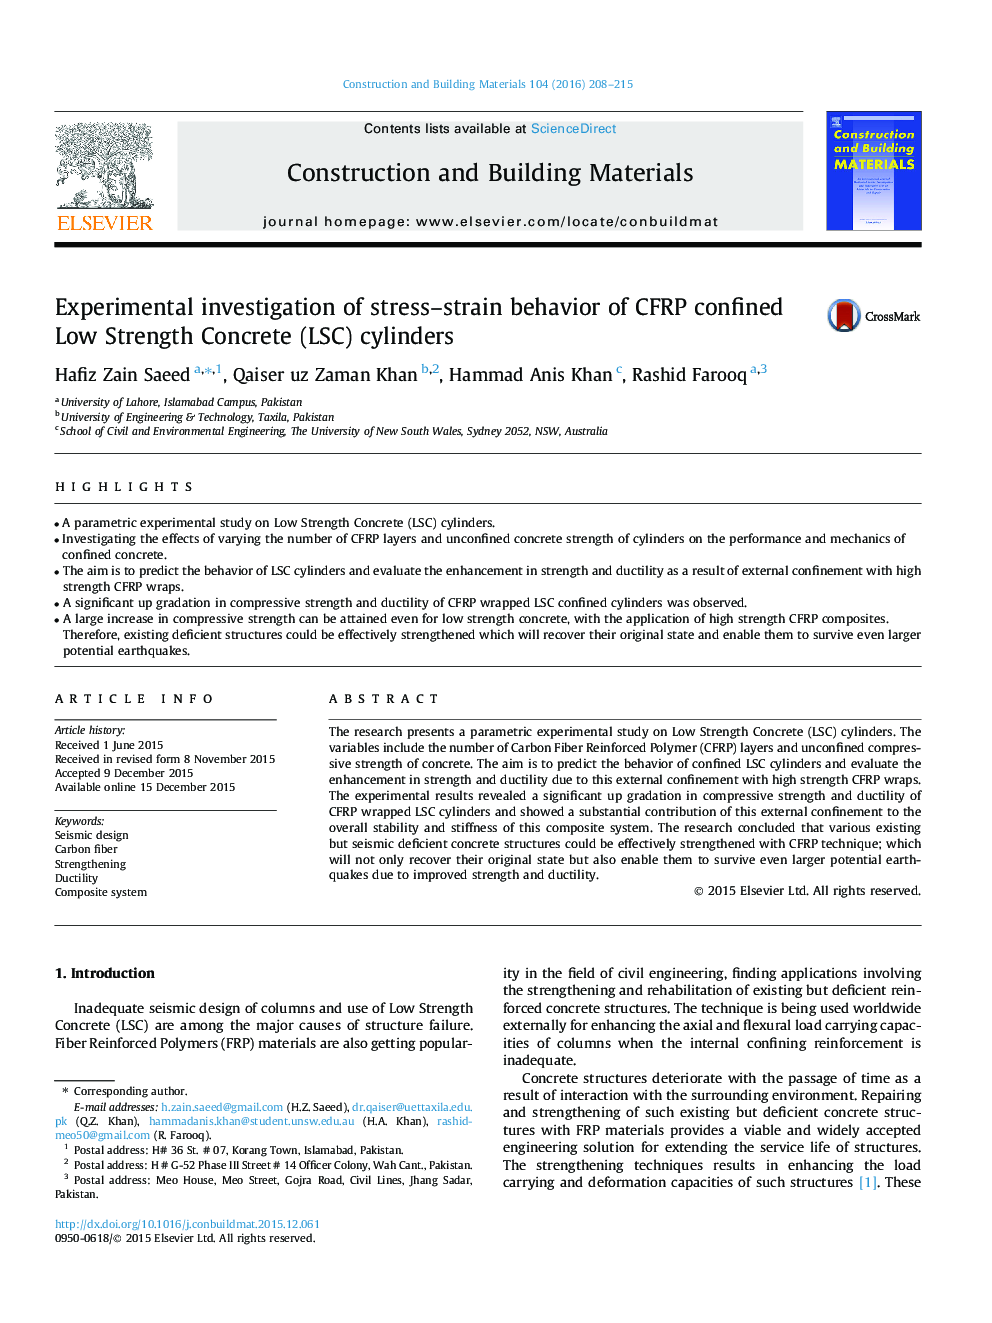 Experimental investigation of stress–strain behavior of CFRP confined Low Strength Concrete (LSC) cylinders